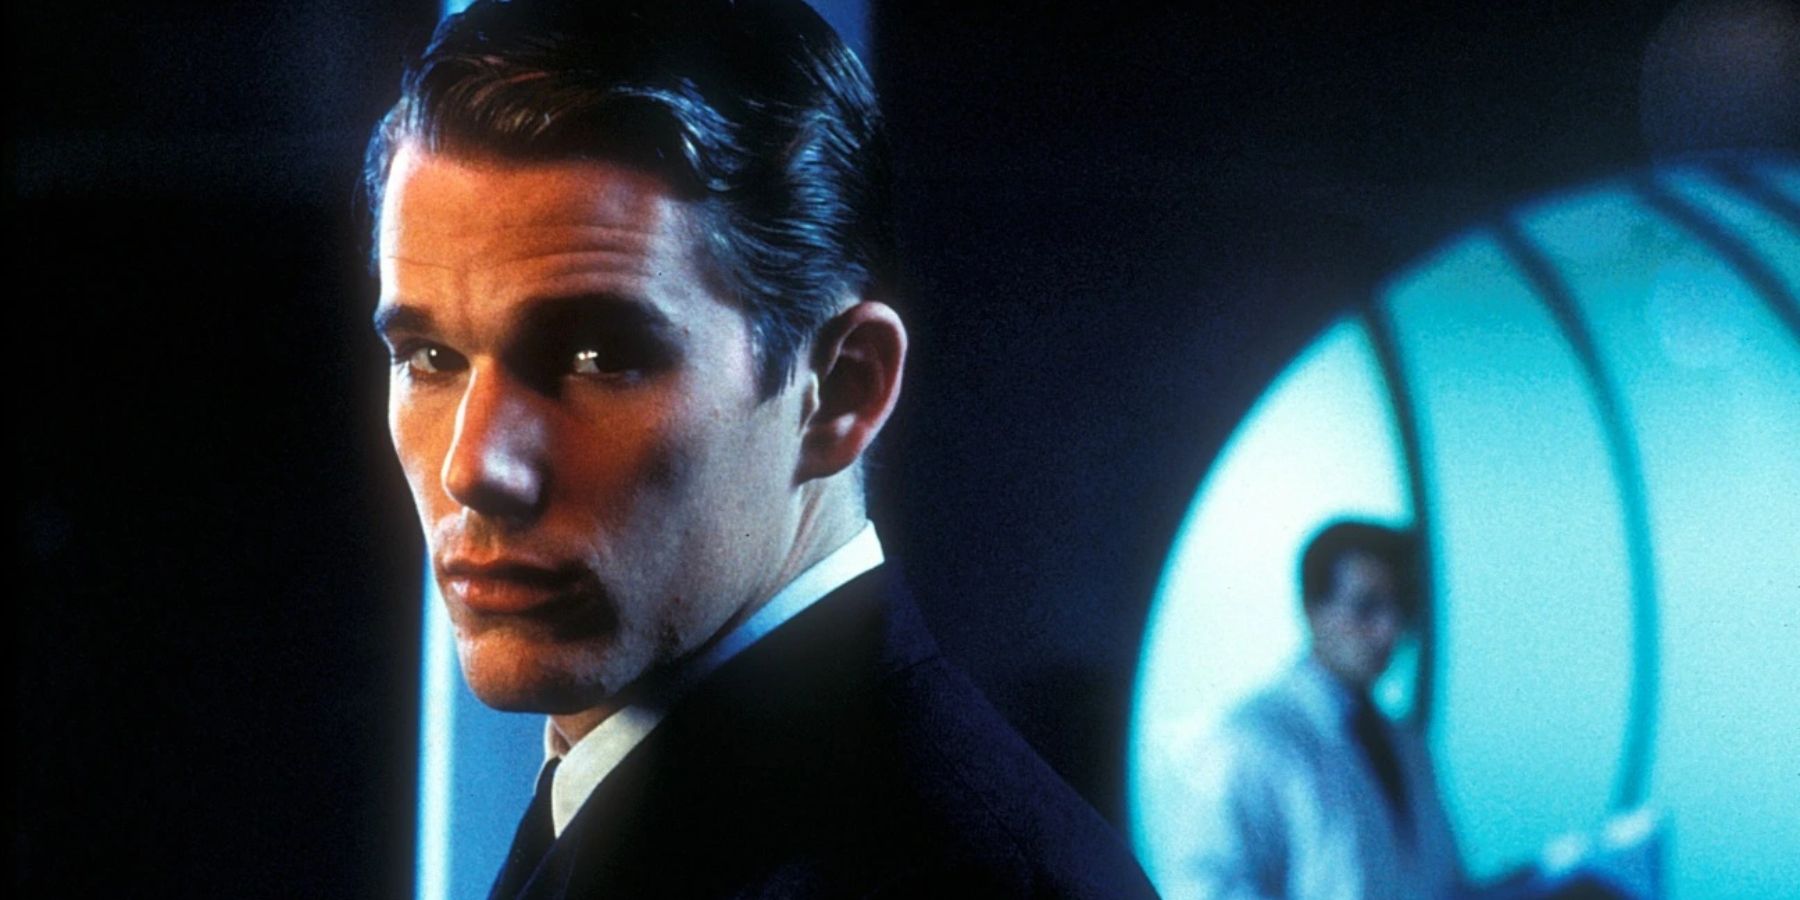 Ethan Hawke as Vincent/Jerome in Gattaca